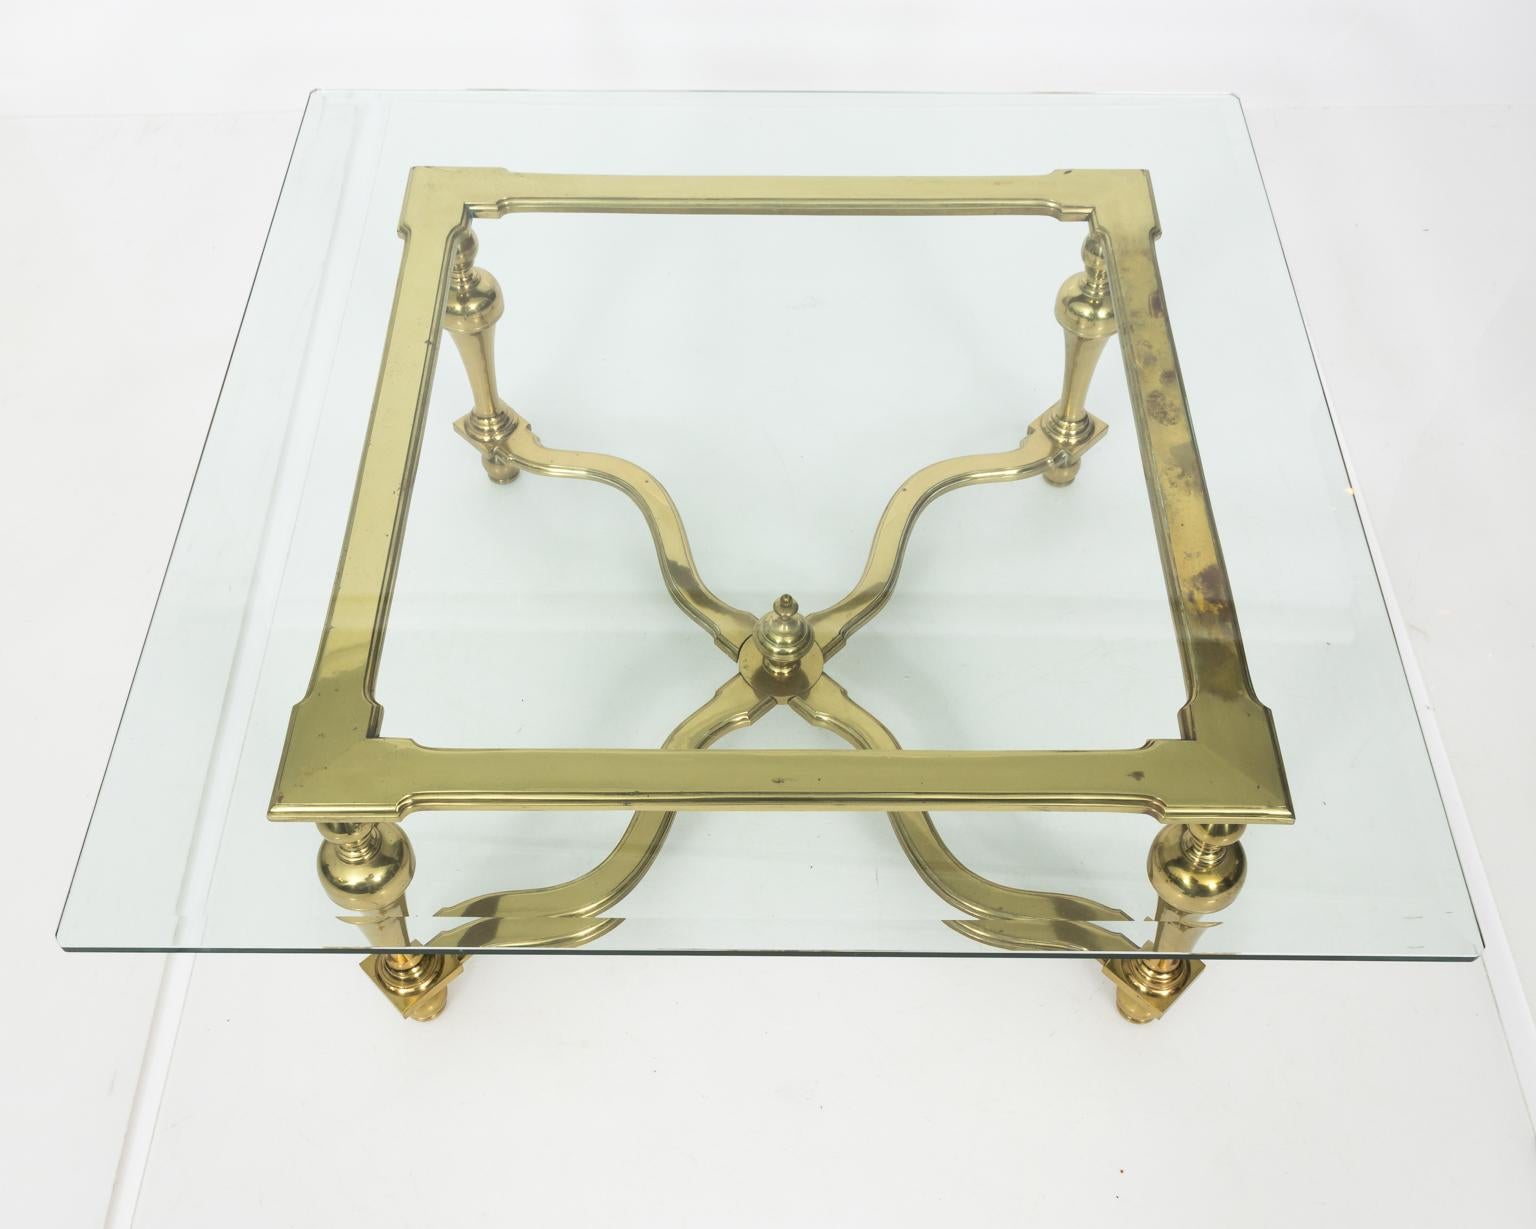 1970s brass and glass English coffee table with glass top. The base is highlighted by trumpet shaped legs and cross stretcher with a center ball finial.